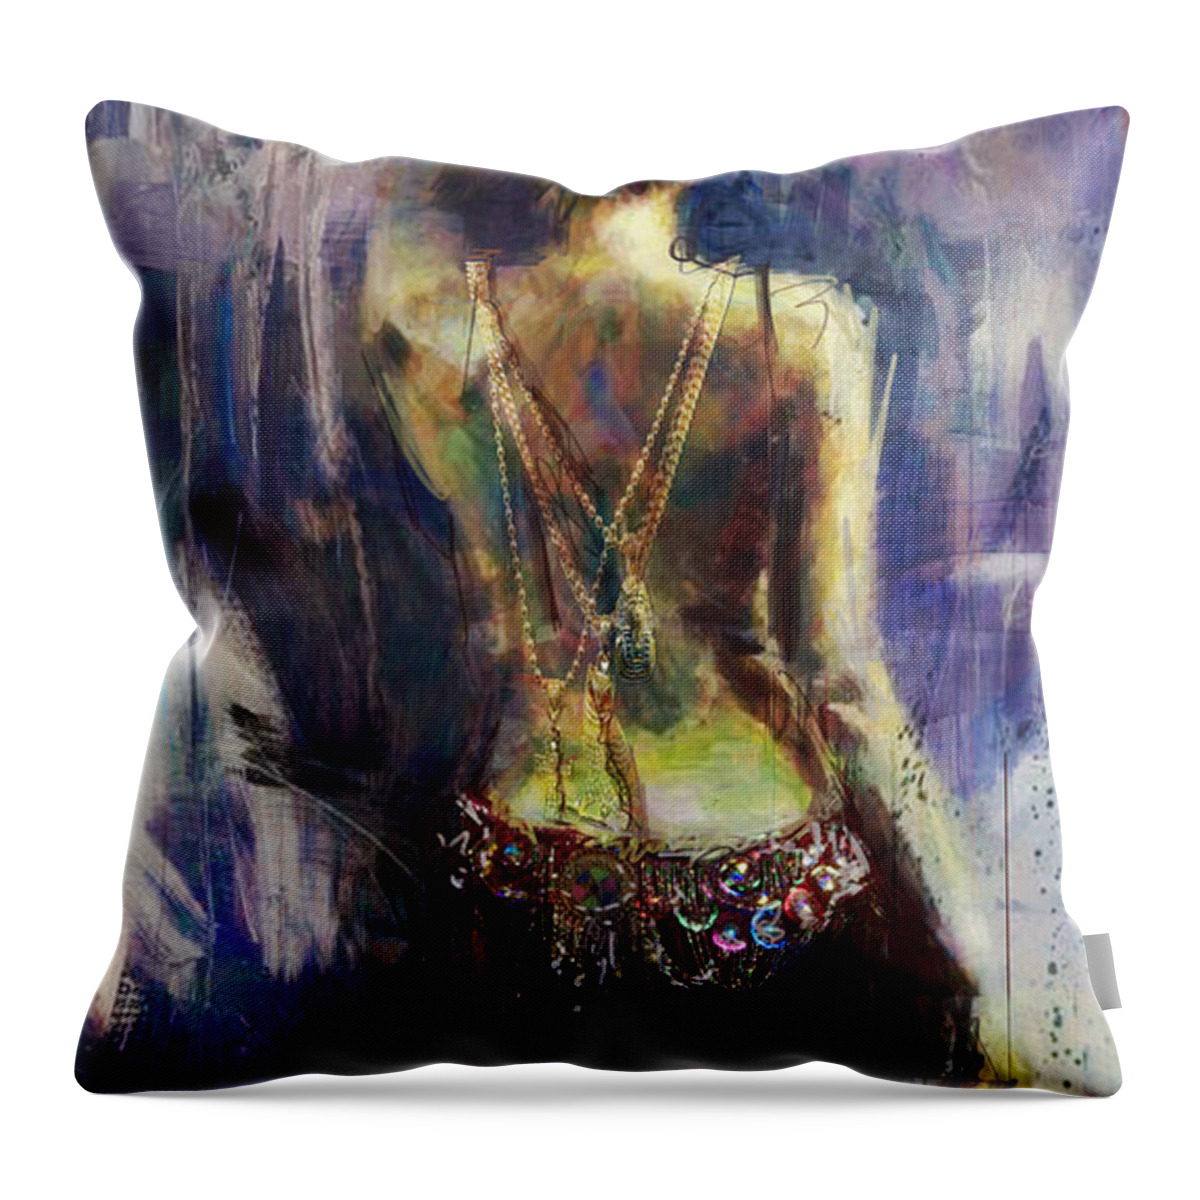 Egypt Throw Pillow featuring the painting Egpytian Culture 42b by Corporate Art Task Force